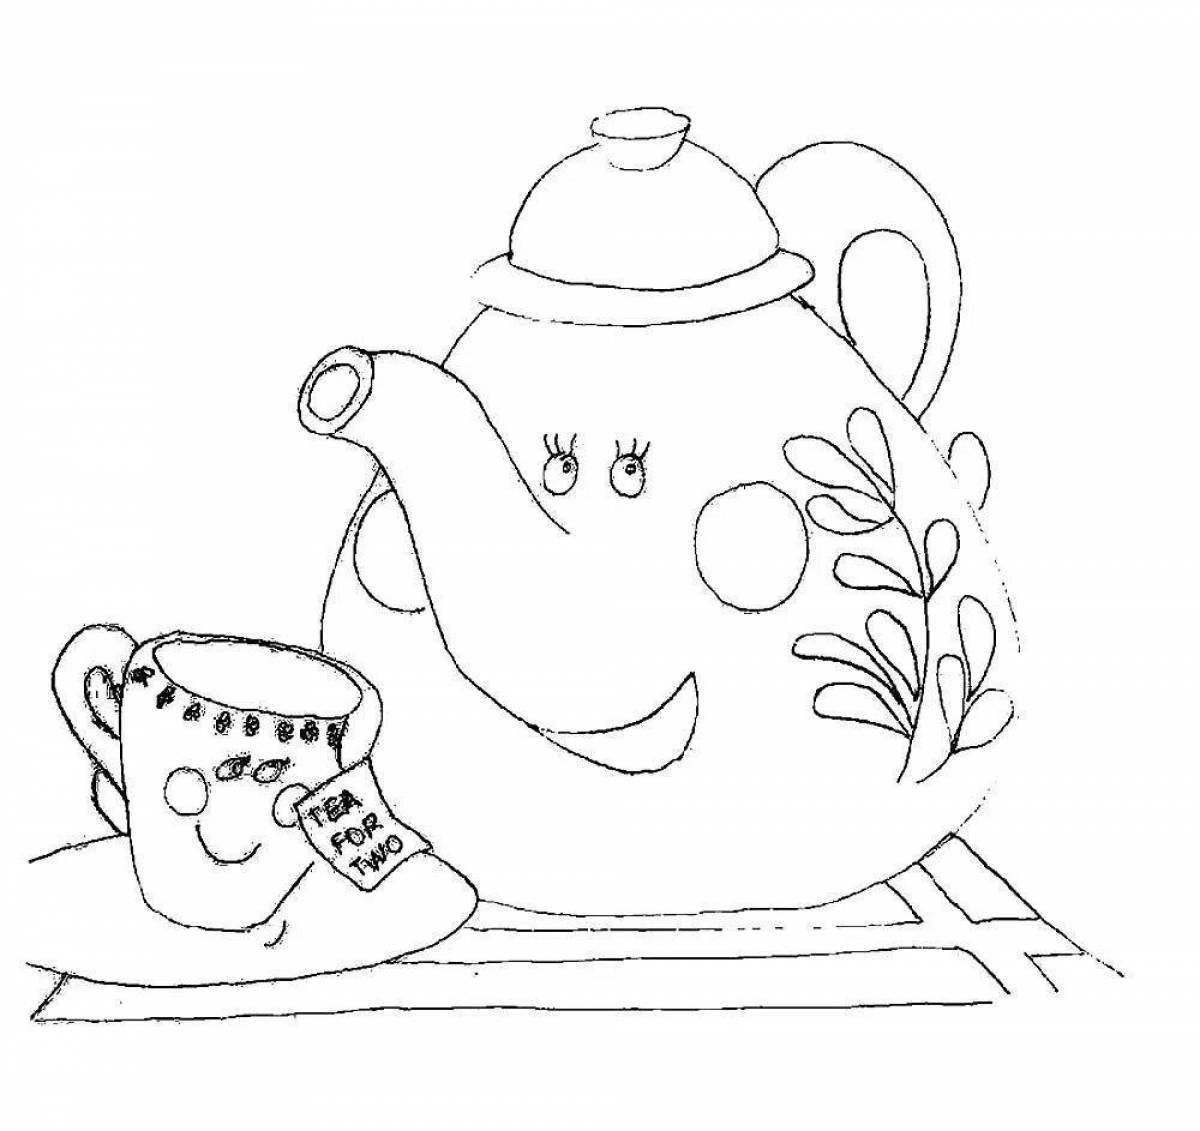 Great teapot and cup coloring book